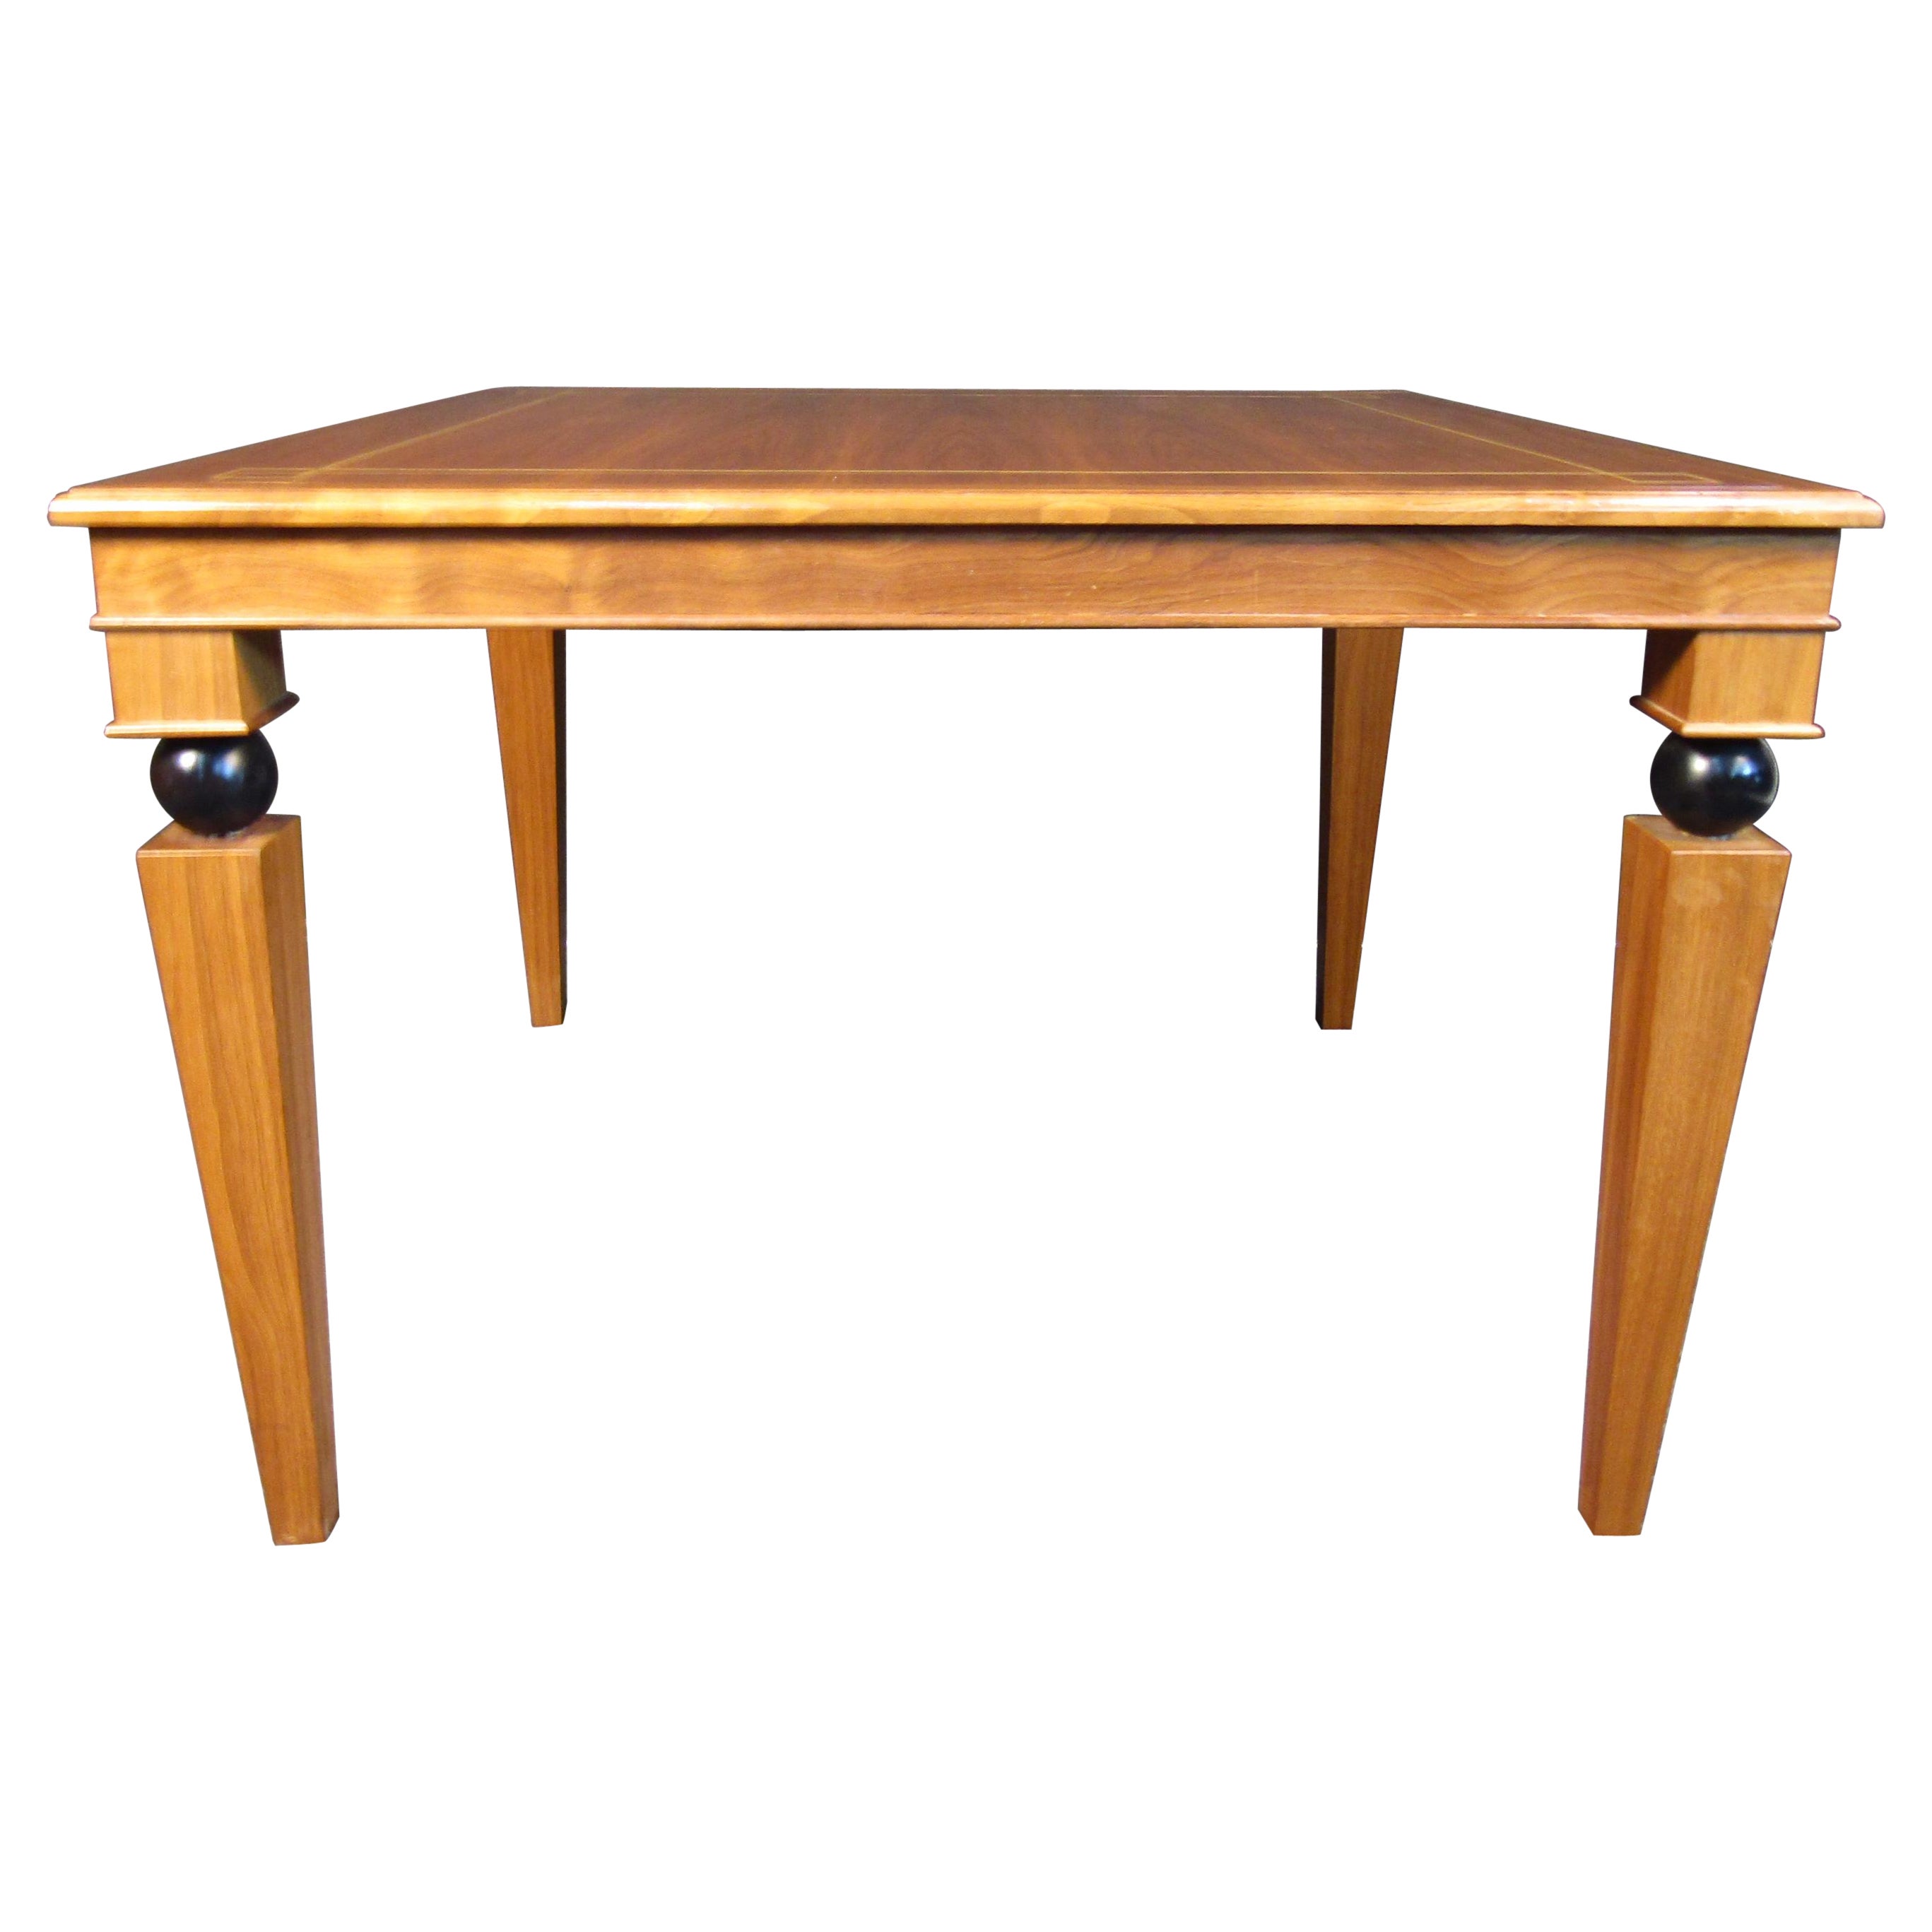 This vintage sycamore table features a decorative inlay on its top surface, and is designed in the style of Andre Arbus. Light sycamore woodgrain adds to this table's unique look. Please confirm item location with seller (NY/NJ).